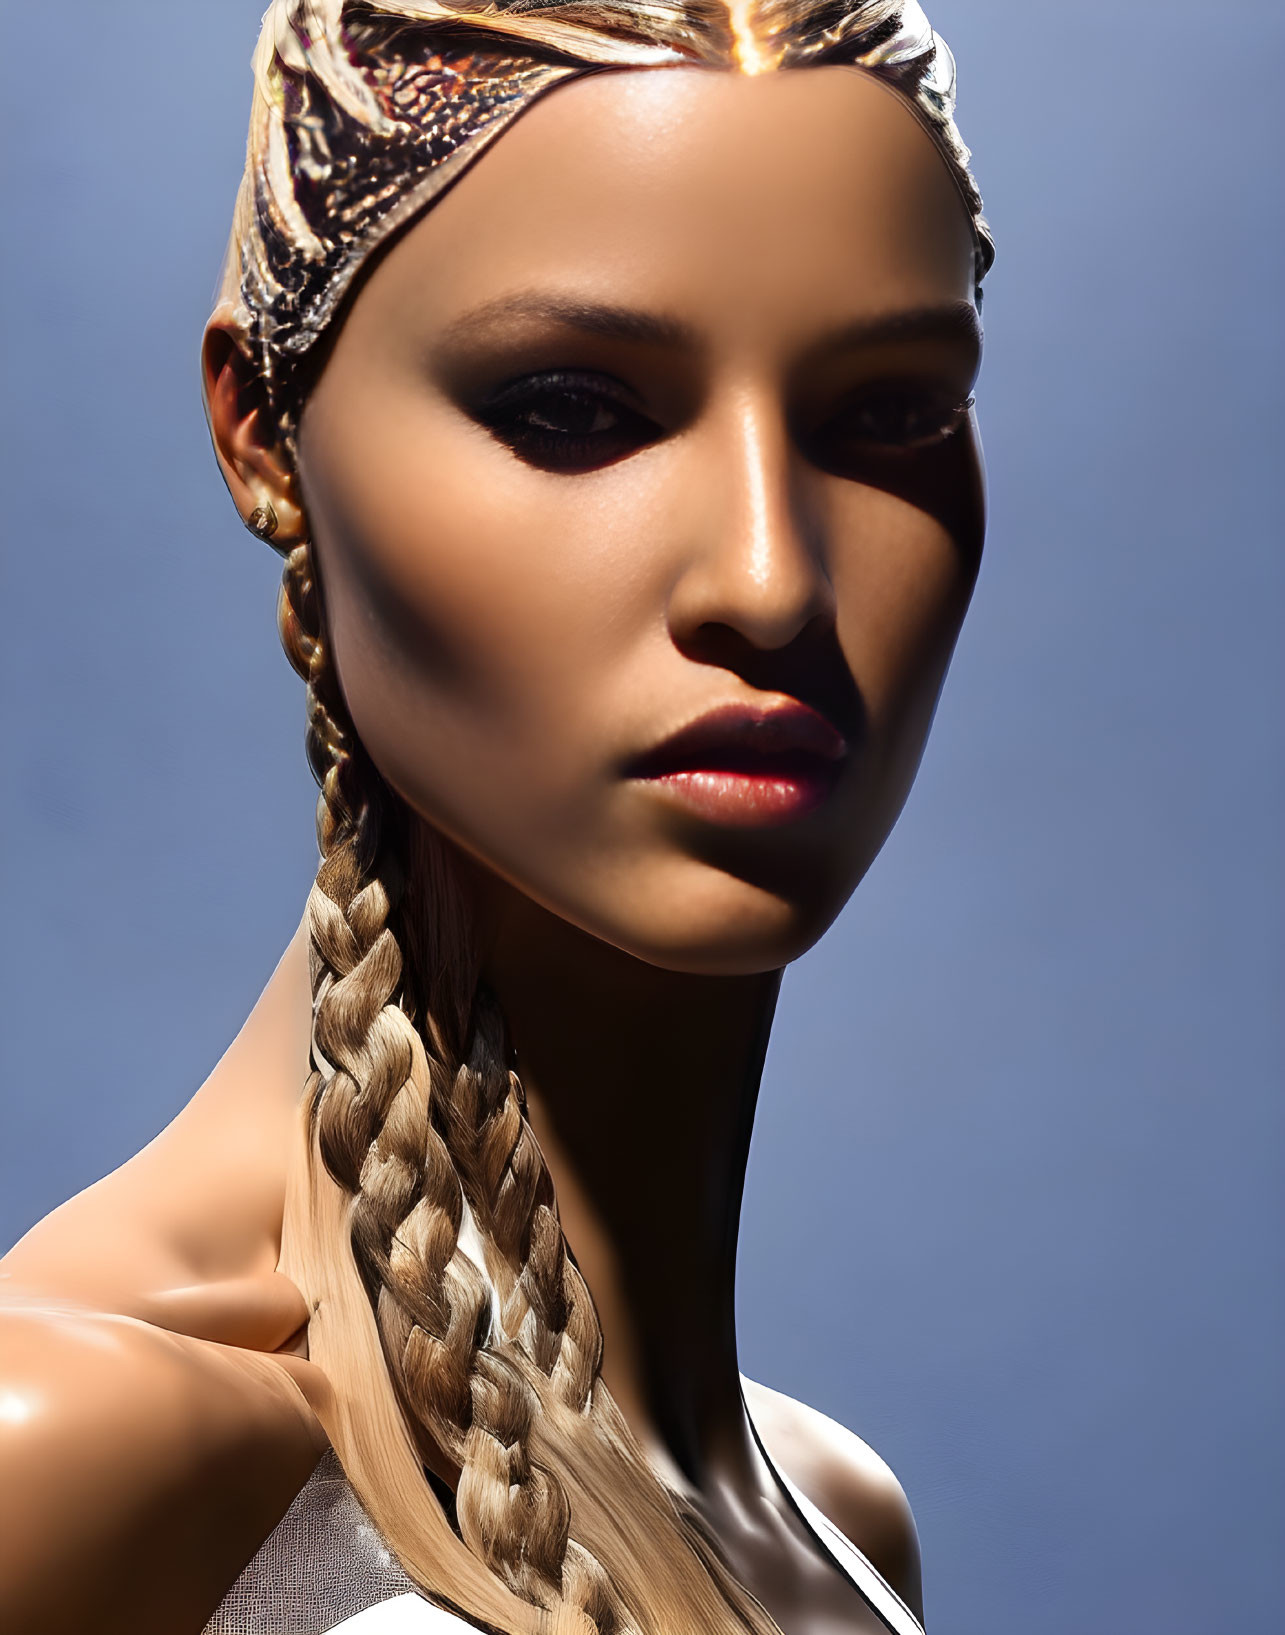 Braided Hairstyle Woman with Contoured Makeup & Headband on Blue Background